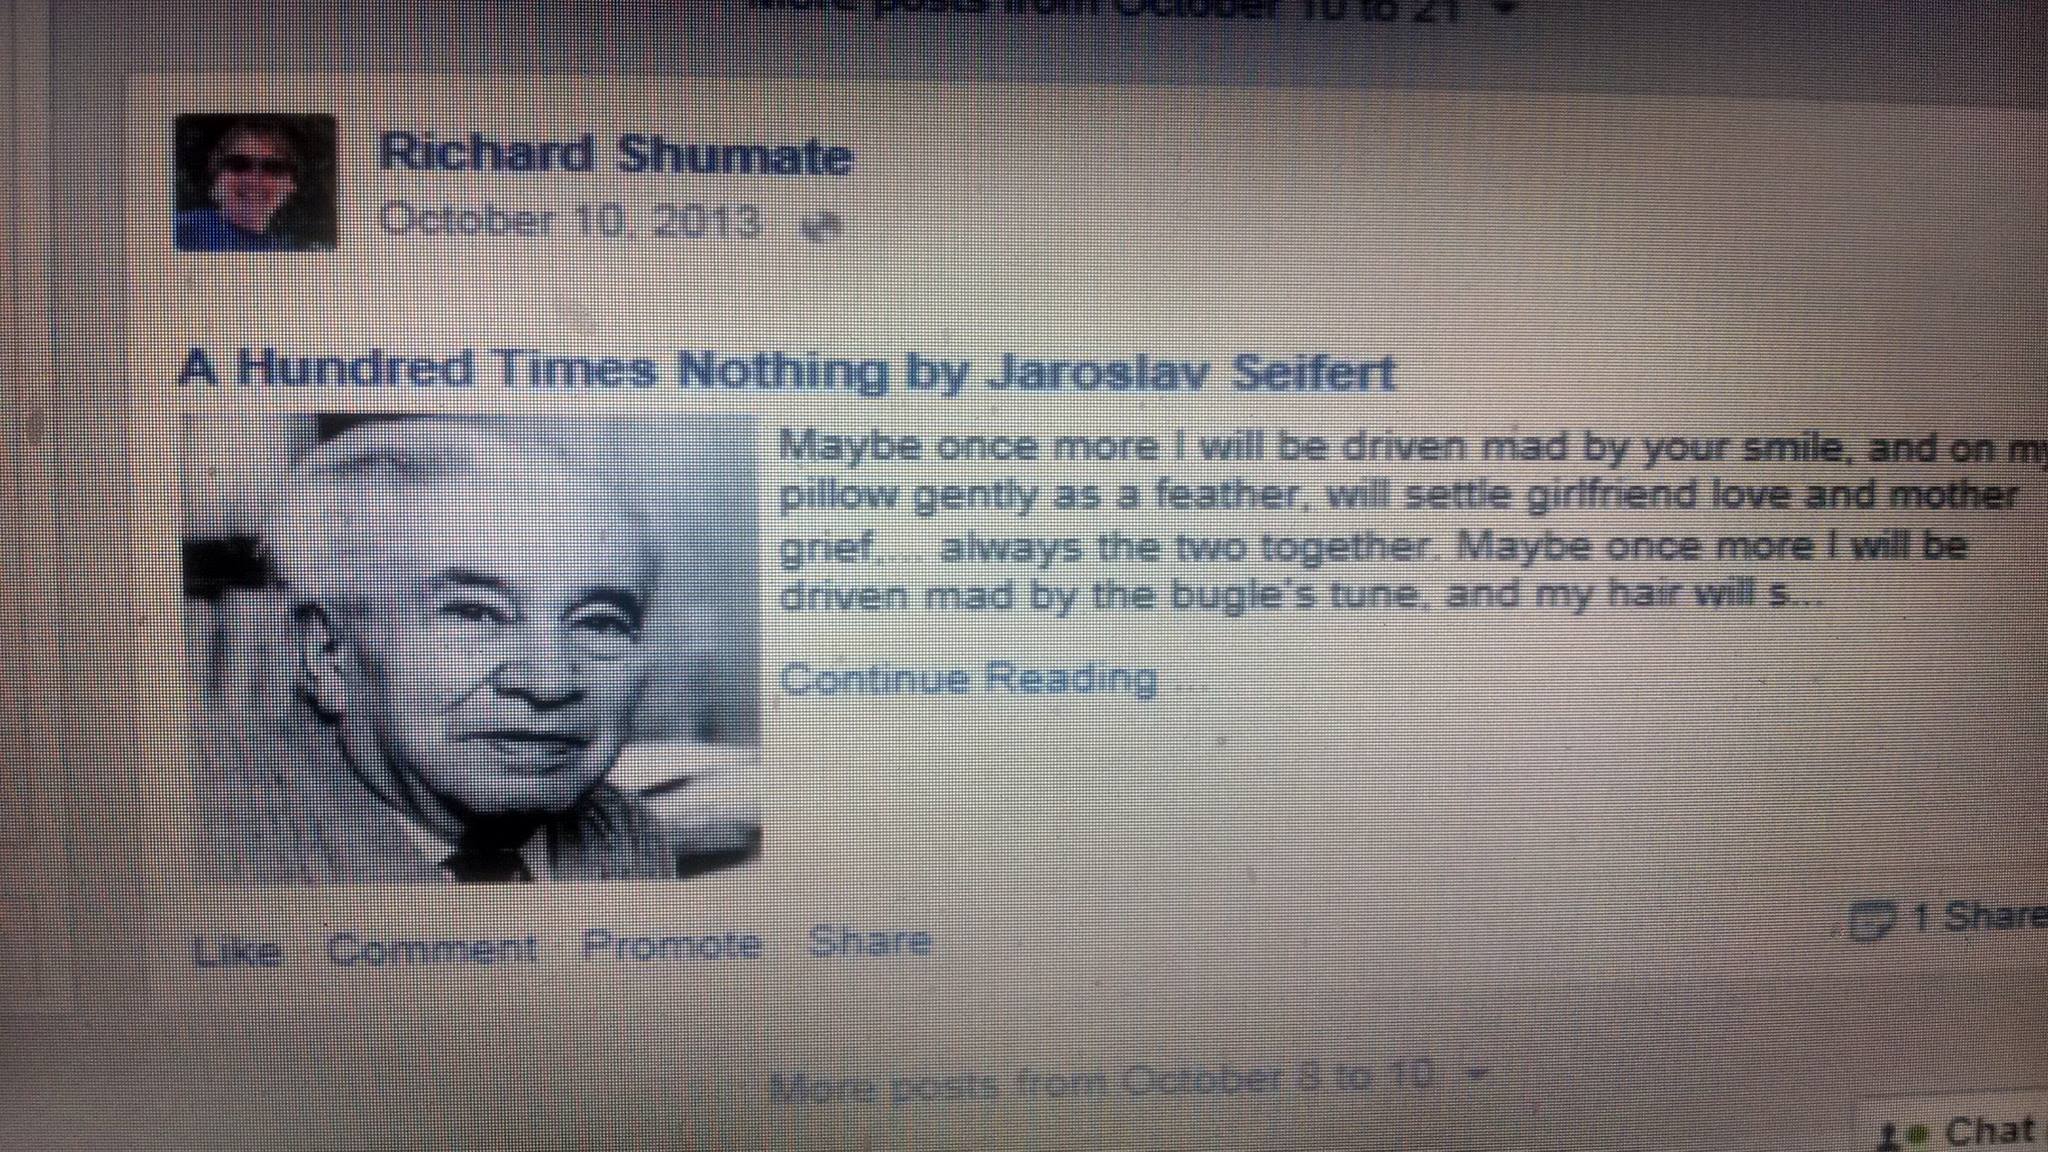 This is a pic of a note I made in Oct 2013 trying to show my FB friends where I got A Hundred Times Nothing. I was thinking how cool it would be if his relative knew. He died in 1986. The next day his grandson showed up. Have that pic too!